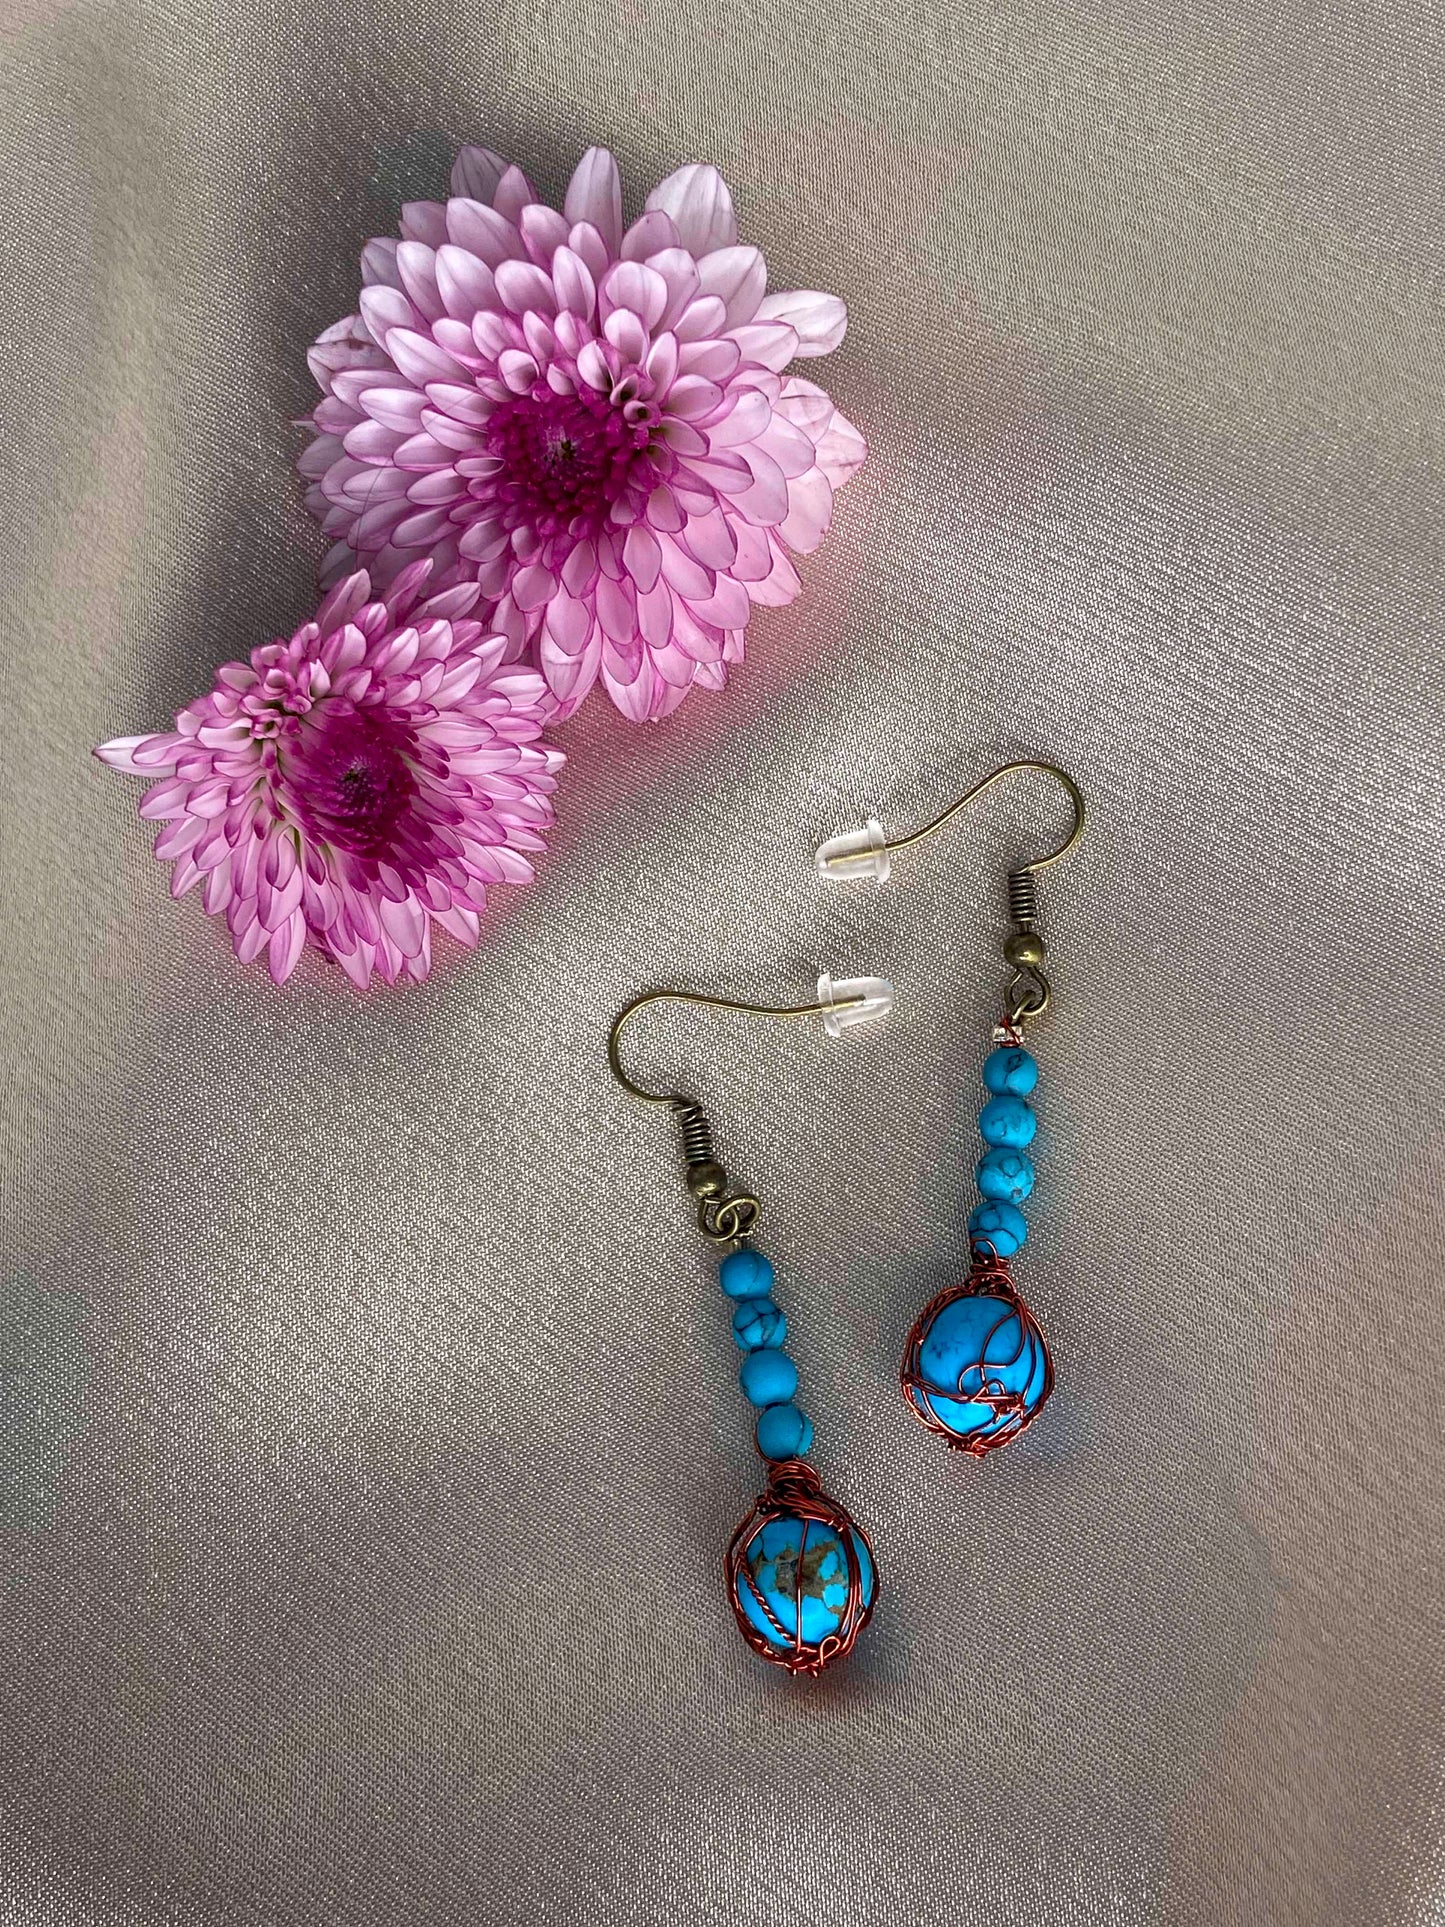 A pair of handcrafted wire-wrapped and beaded turquoise earrings.